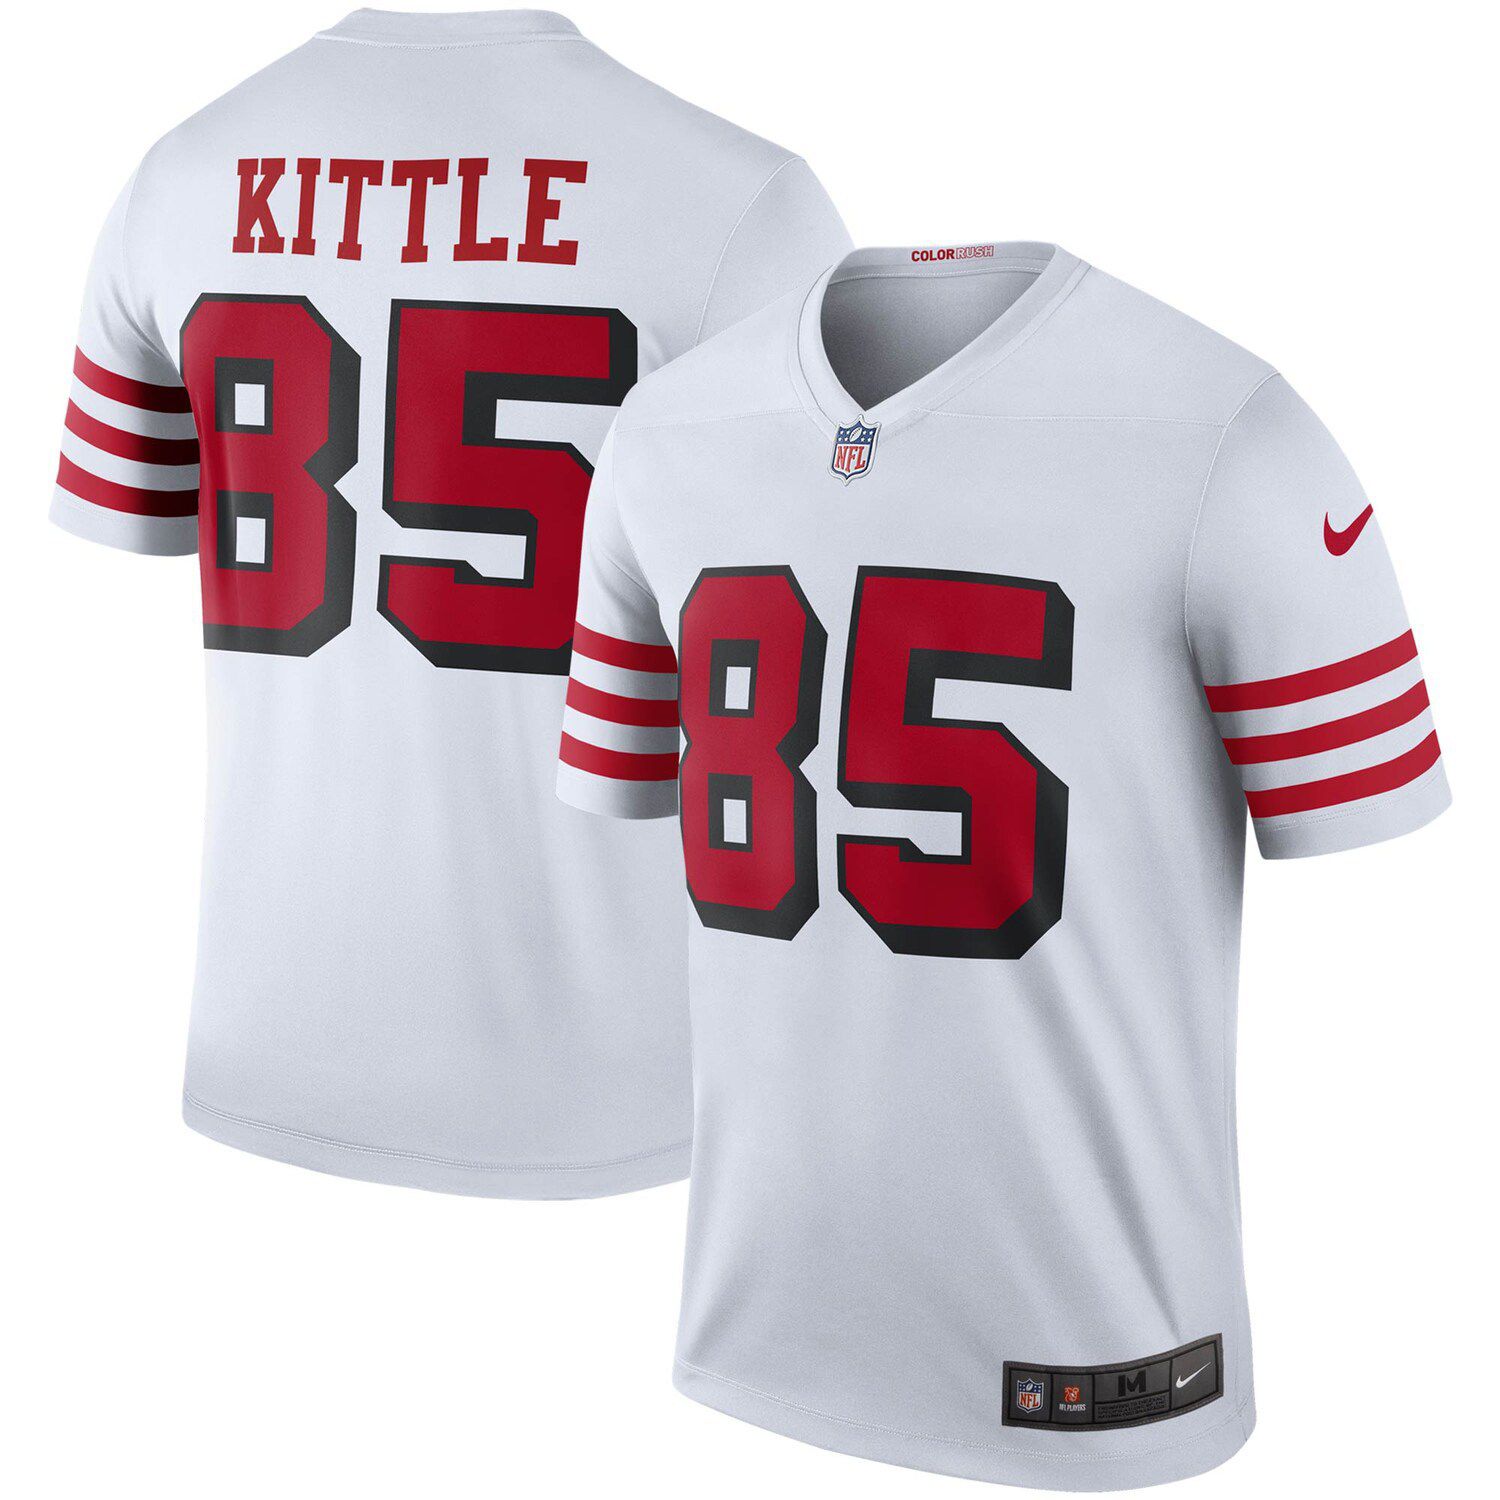 49ers clearance